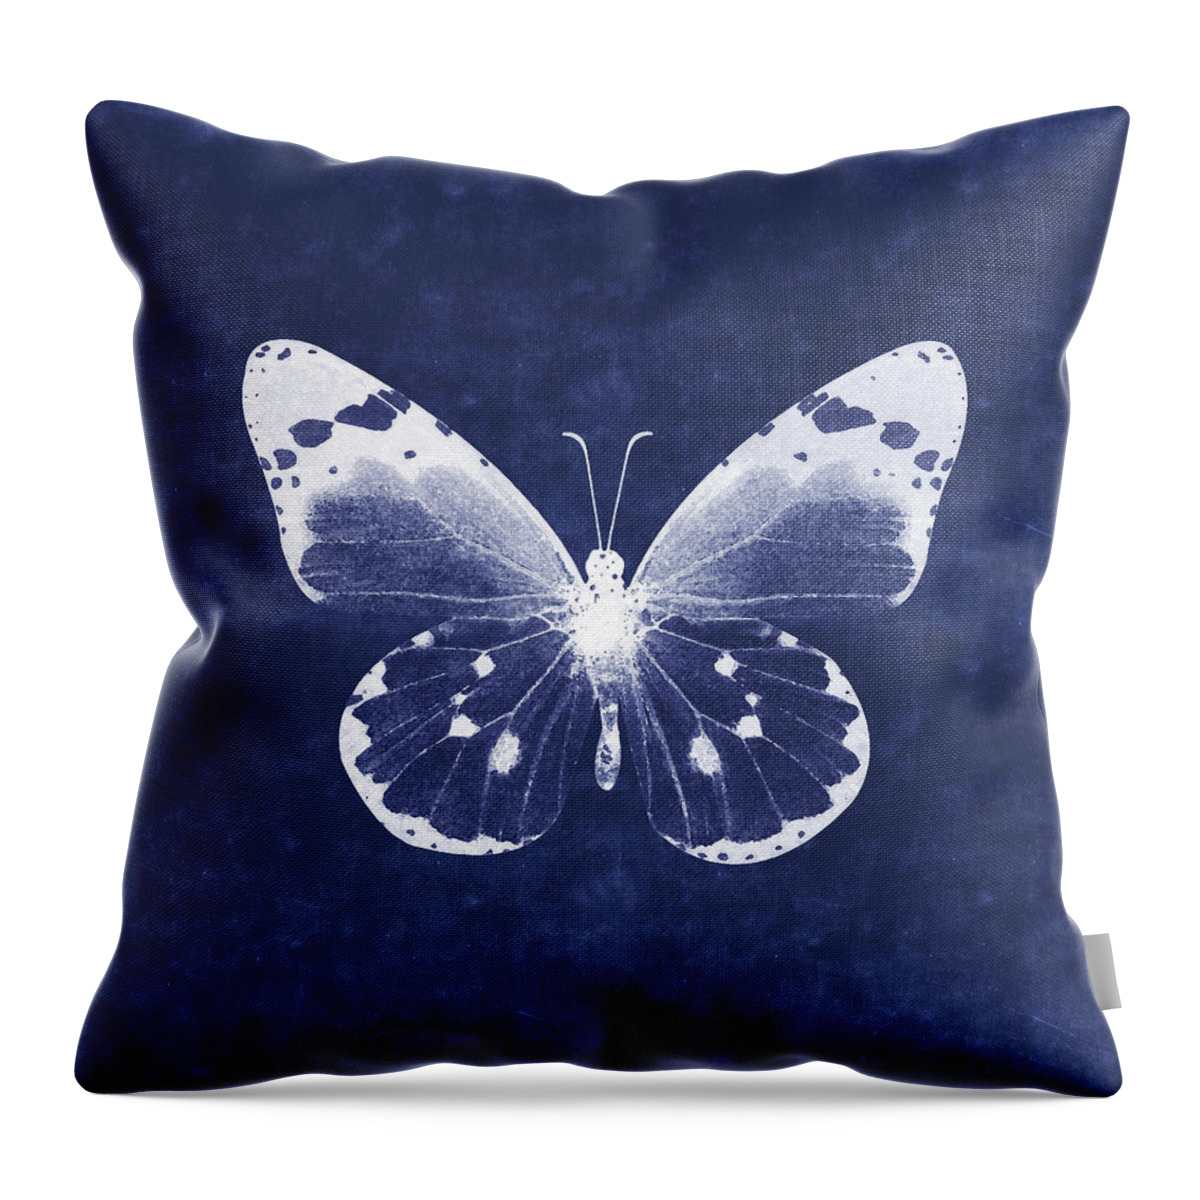 Butterfly White Blue Indigo Skeleton Butterfly Wings Modern Bohemianinsect Bug Garden Home Decorairbnb Decorliving Room Artbedroom Artcorporate Artset Designgallery Wallart By Linda Woodsart For Interior Designersgreeting Cardpillowtotehospitality Arthotel Artart Licensing Throw Pillow featuring the mixed media White and Indigo Butterfly 1- Art by Linda Woods by Linda Woods